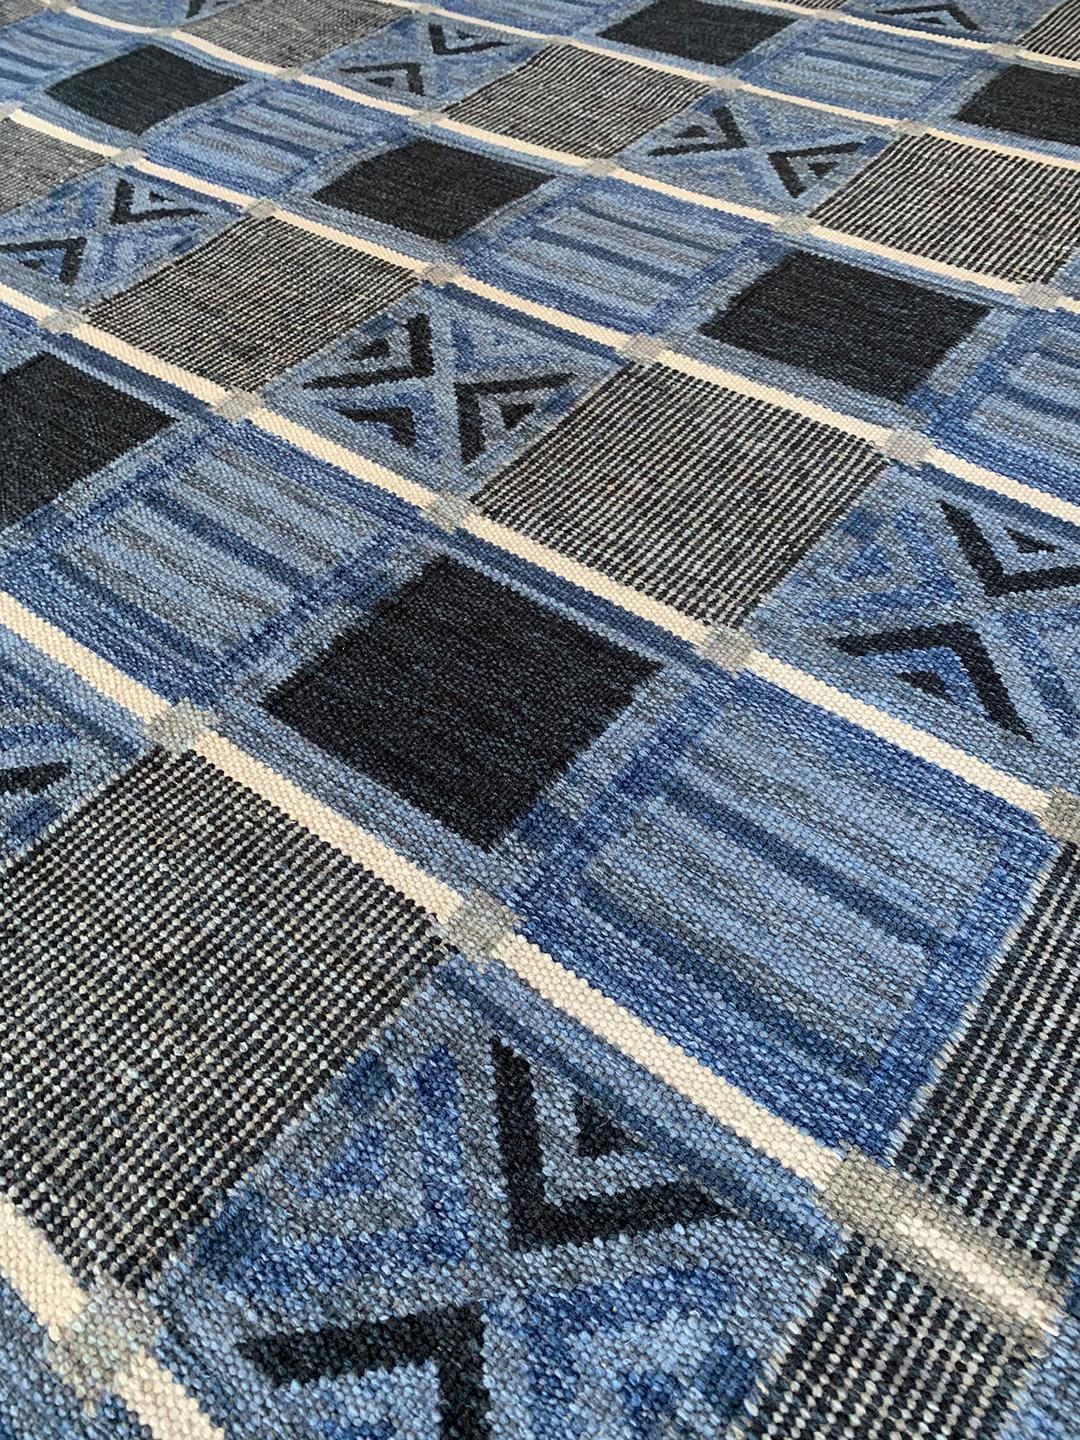 The Swedish collection is primarily inspired by vintage Swedish flat-weave rugs, whose geometric designs are relevant as ever in the 21st century. The collection utilizes a number of flat-weave techniques, yielding various unique textures.